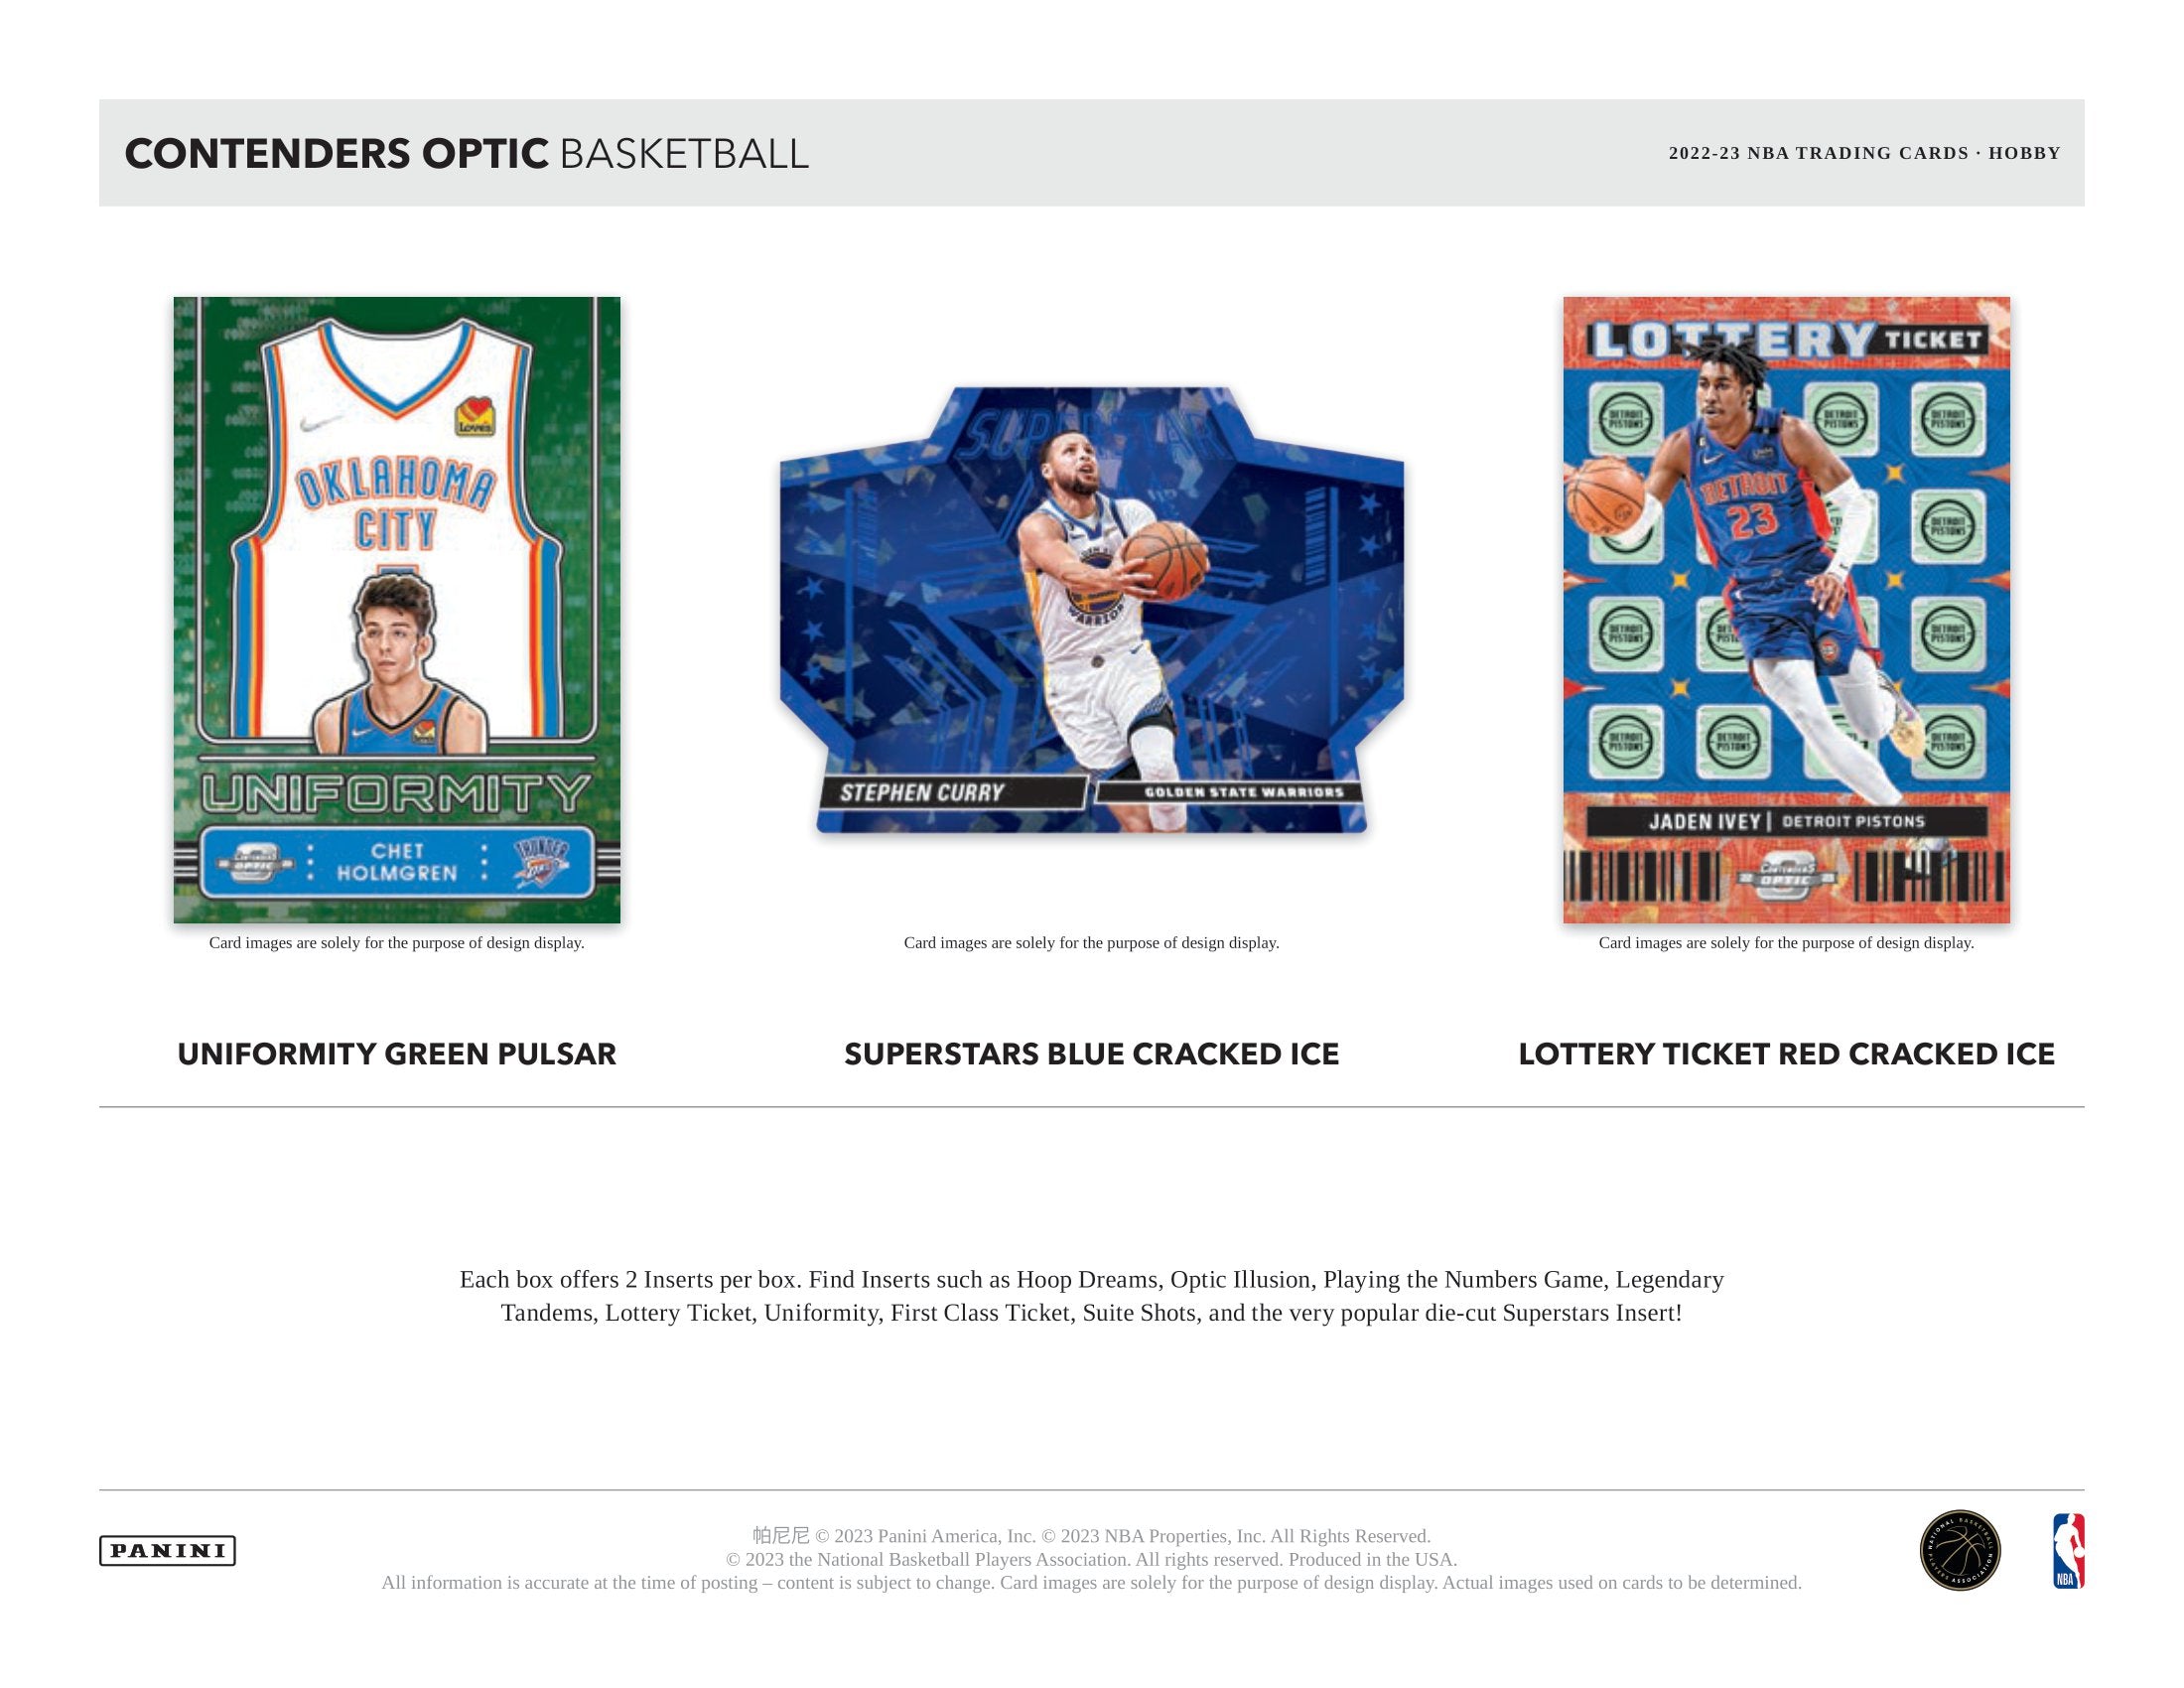 2022-23 PANINI CONTENDERS Basketball GREEN PARALLEL